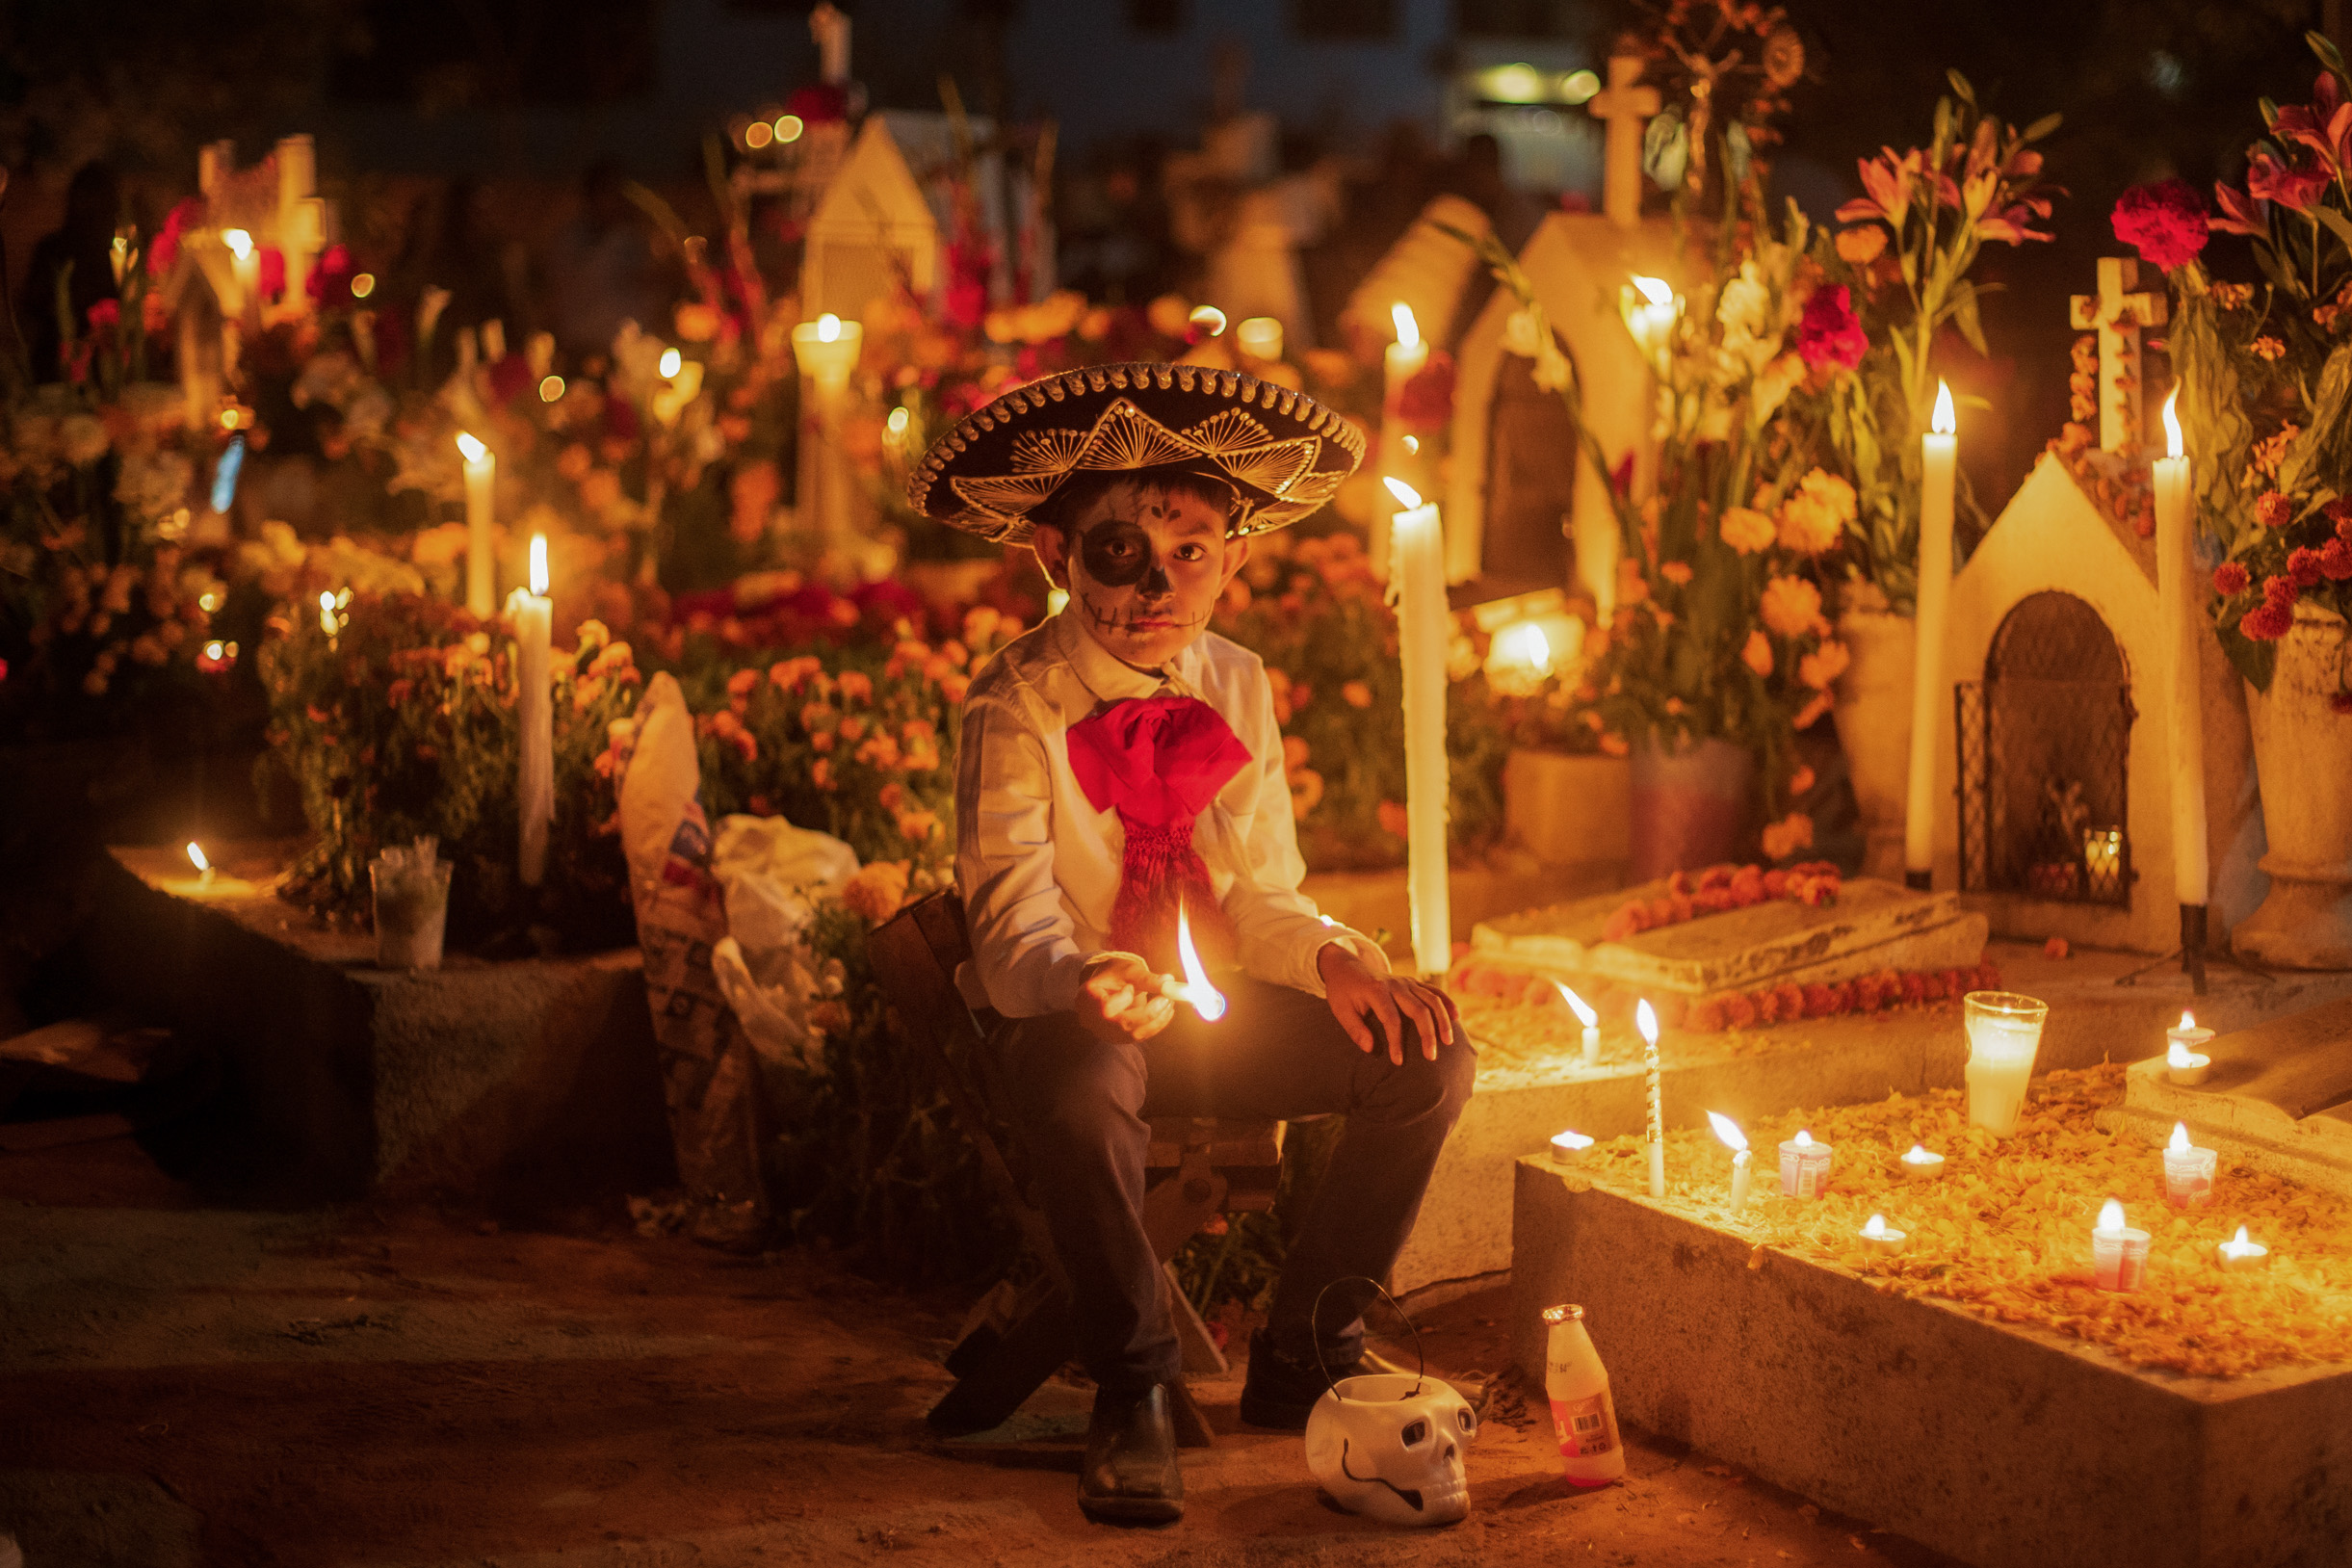 31 October 2022, Mexico, Oaxaca: A boy in costume holds a candle at a decorated cemetery on All Saints' Day which celebrates the Day of the Dead. Photo: Felipe Perez/dpa